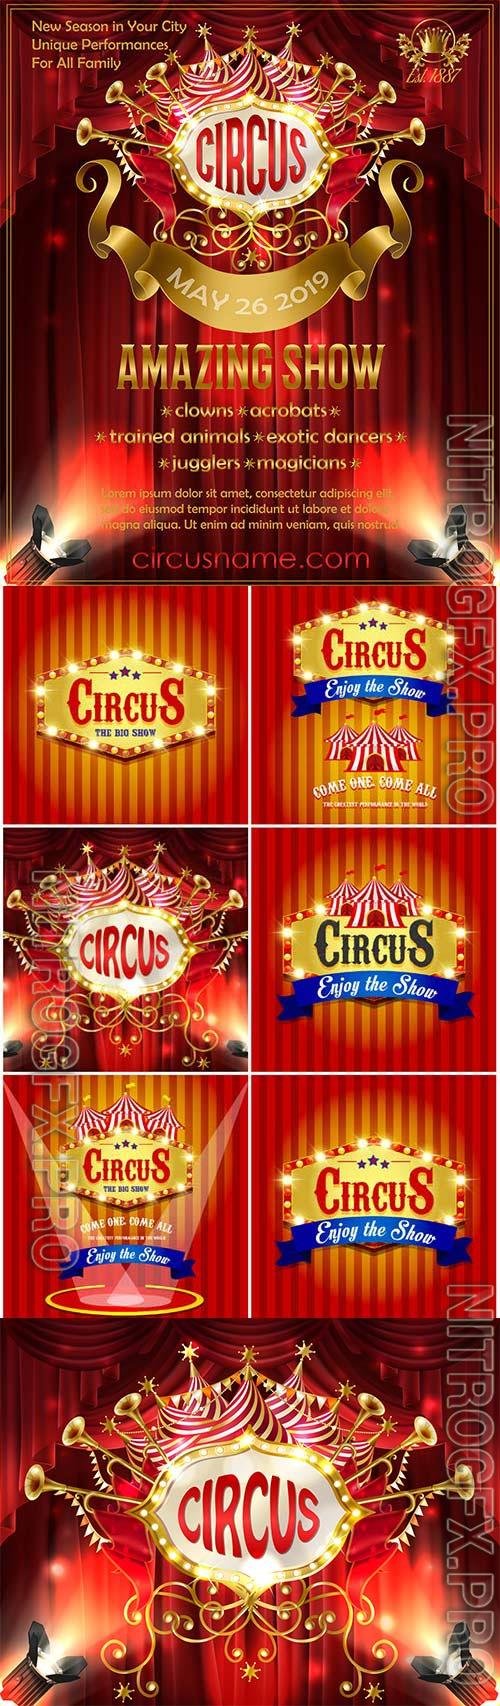 Circus, vector posters